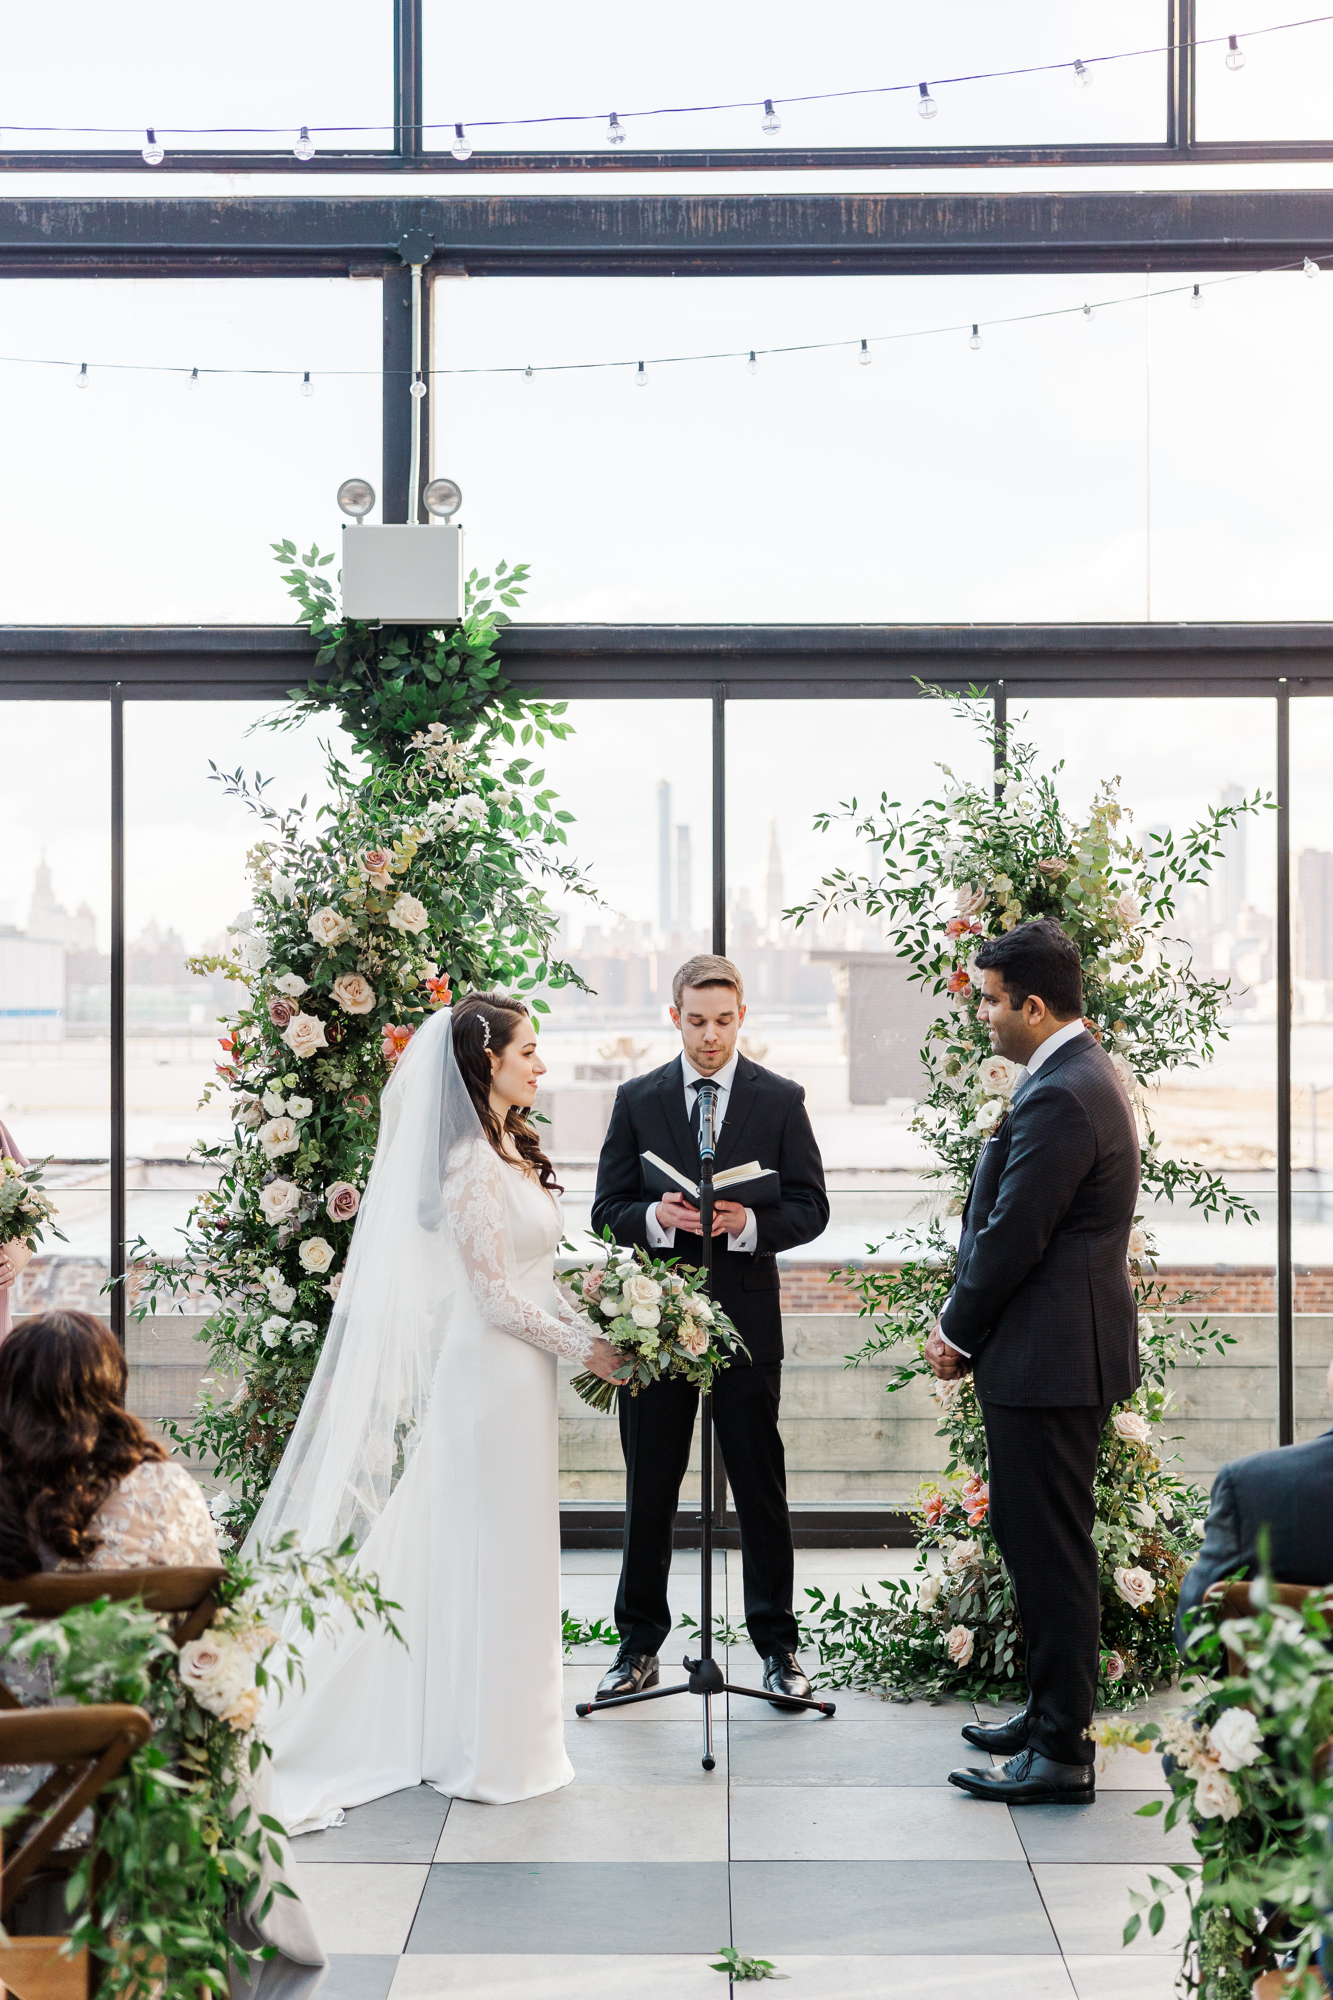 Perfect Brooklyn Wedding Photography at 74Wythe with Rooftop NYC Views